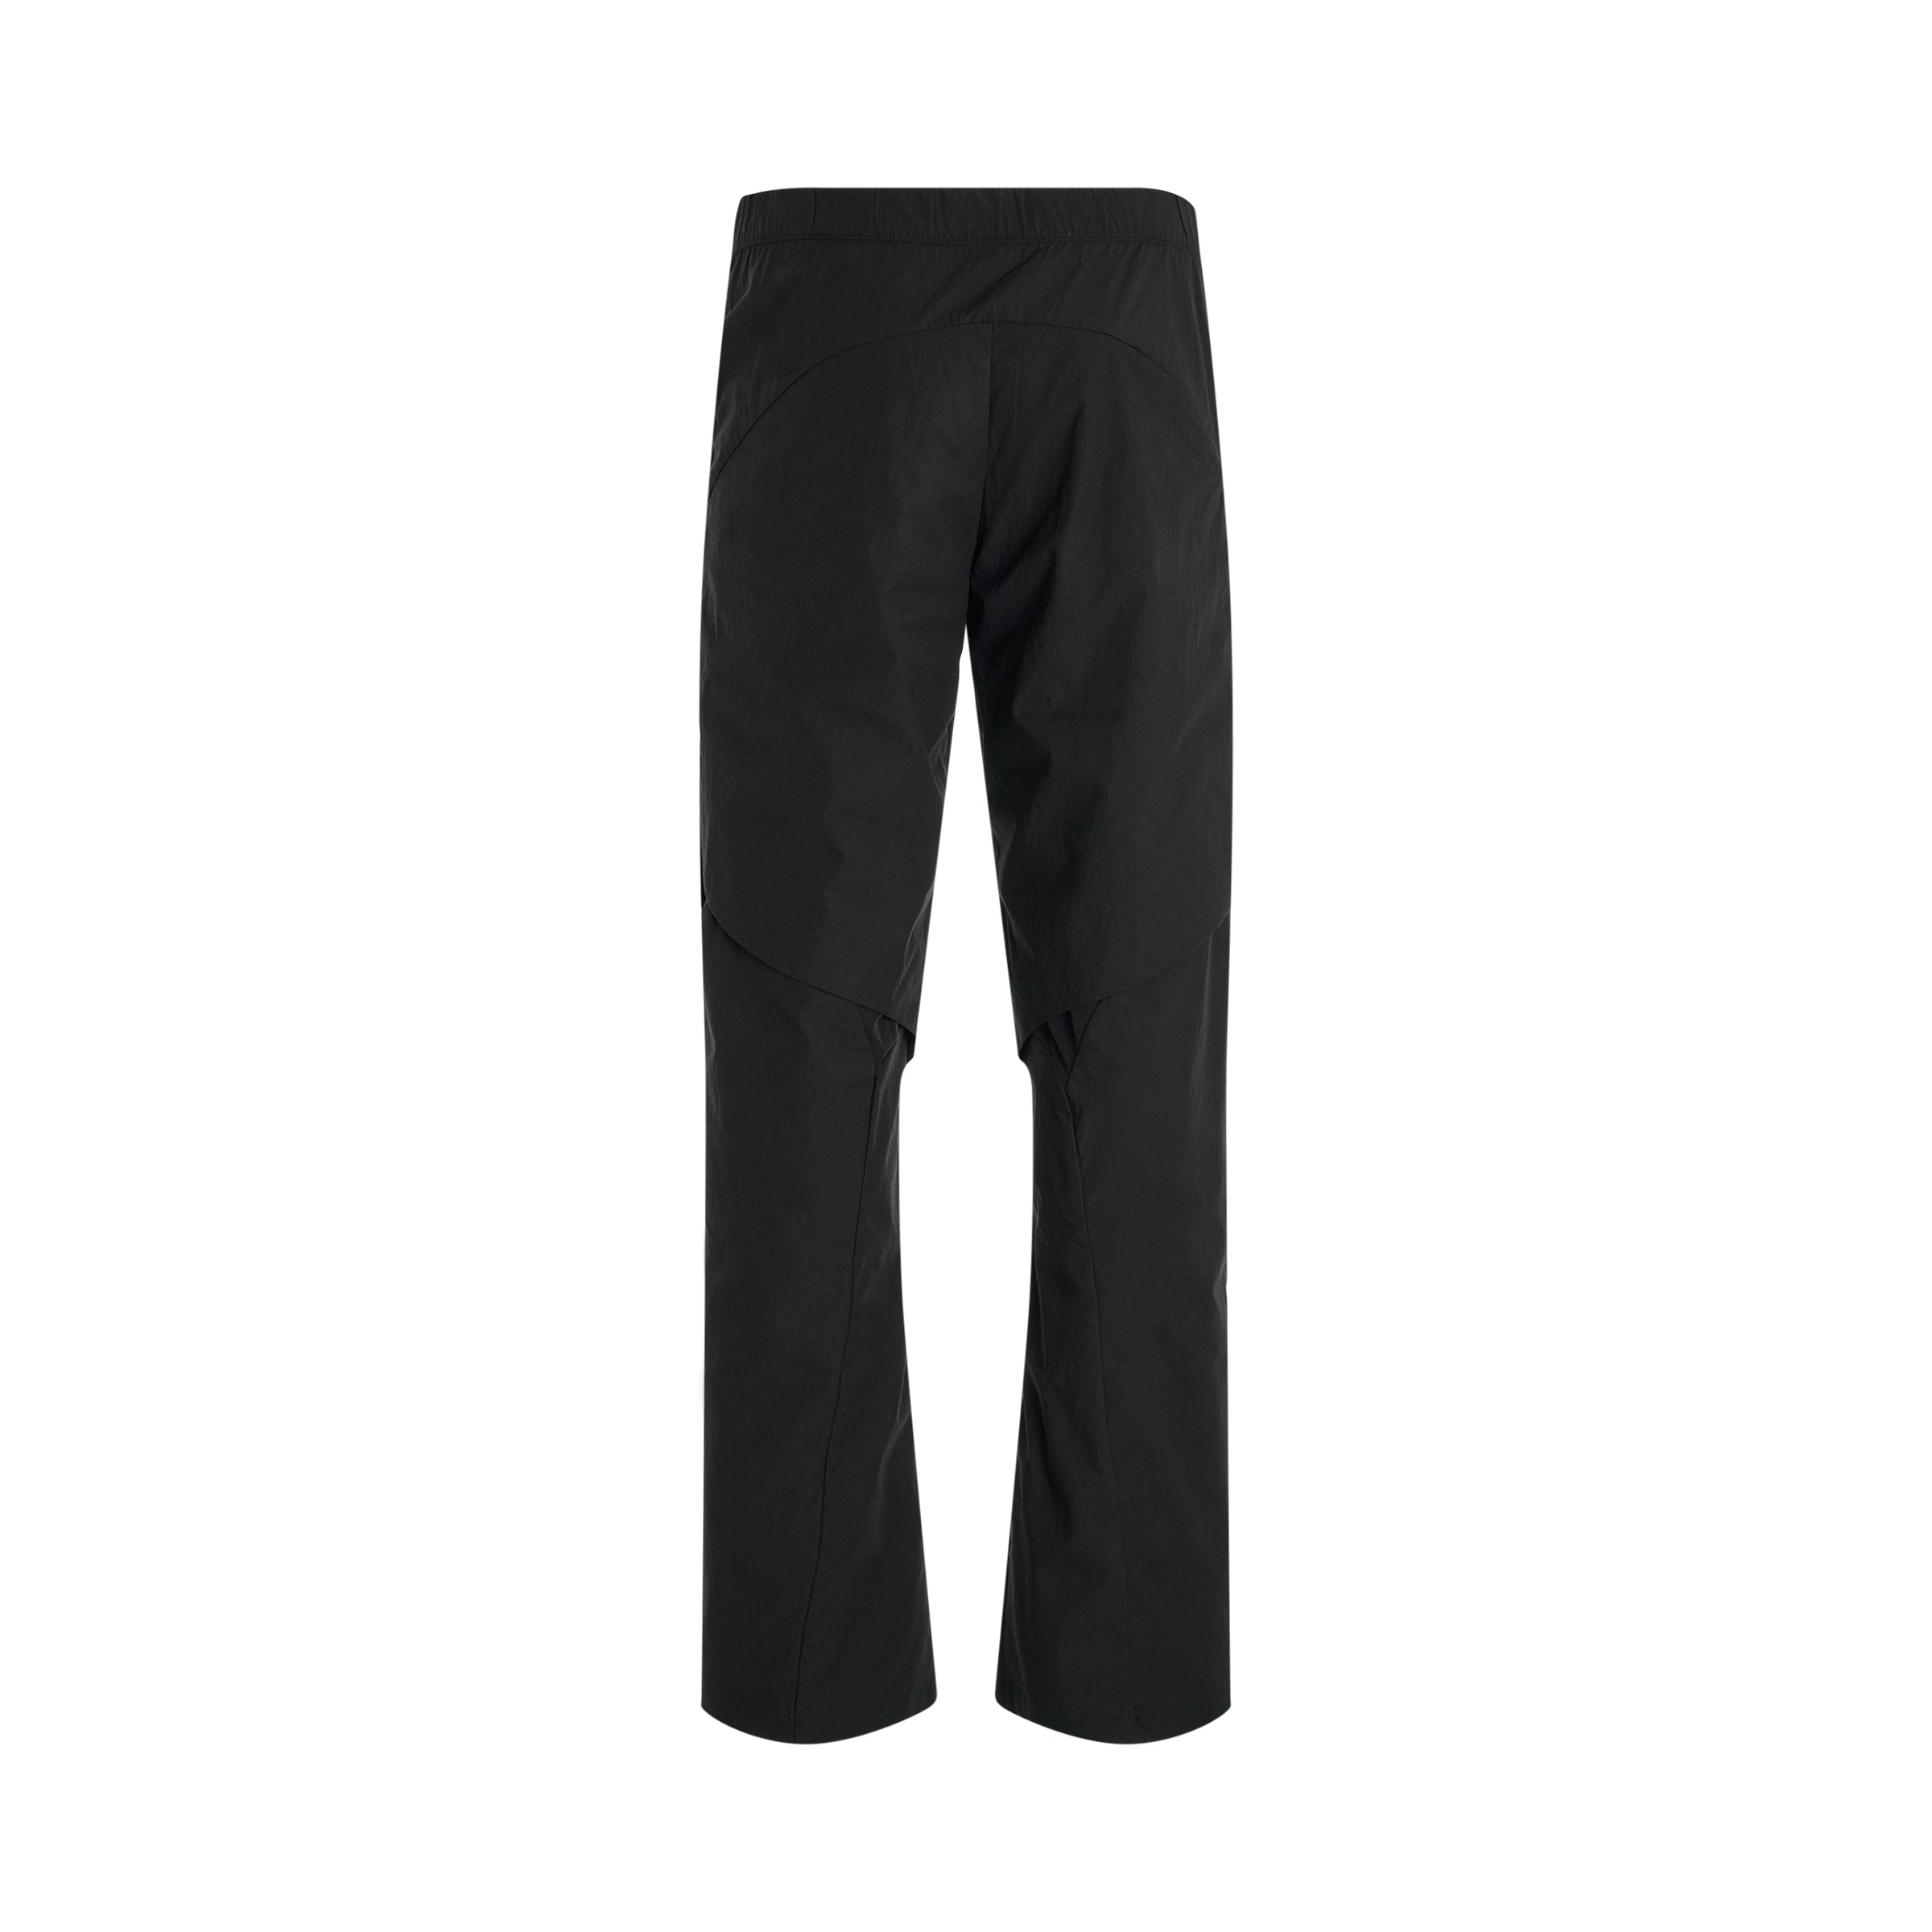 6.0 Technical Pants (Center) in Black - 4